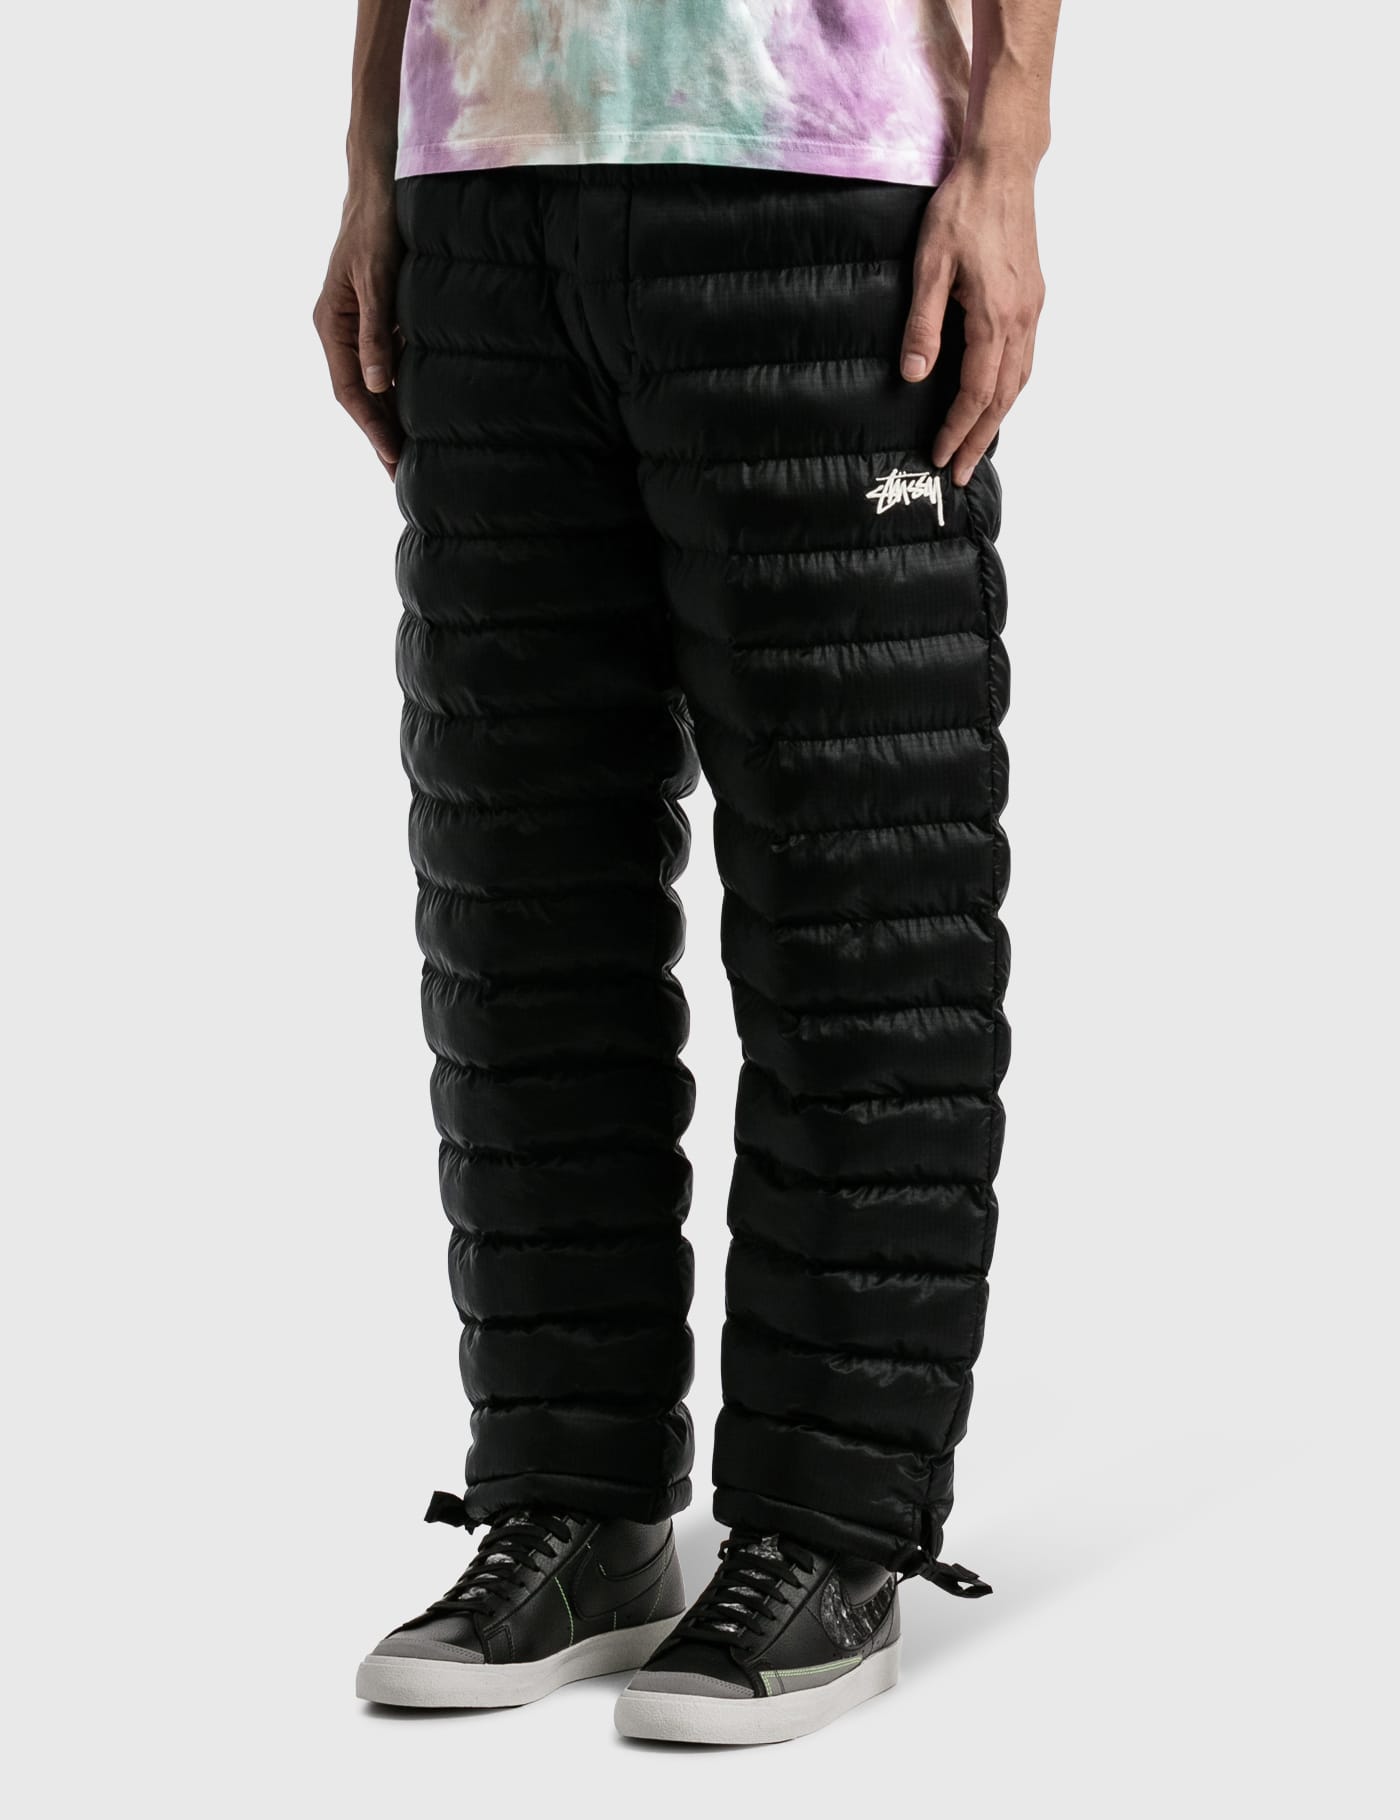 Nike - Nike X Stussy Insulated Pants | HBX - Globally Curated